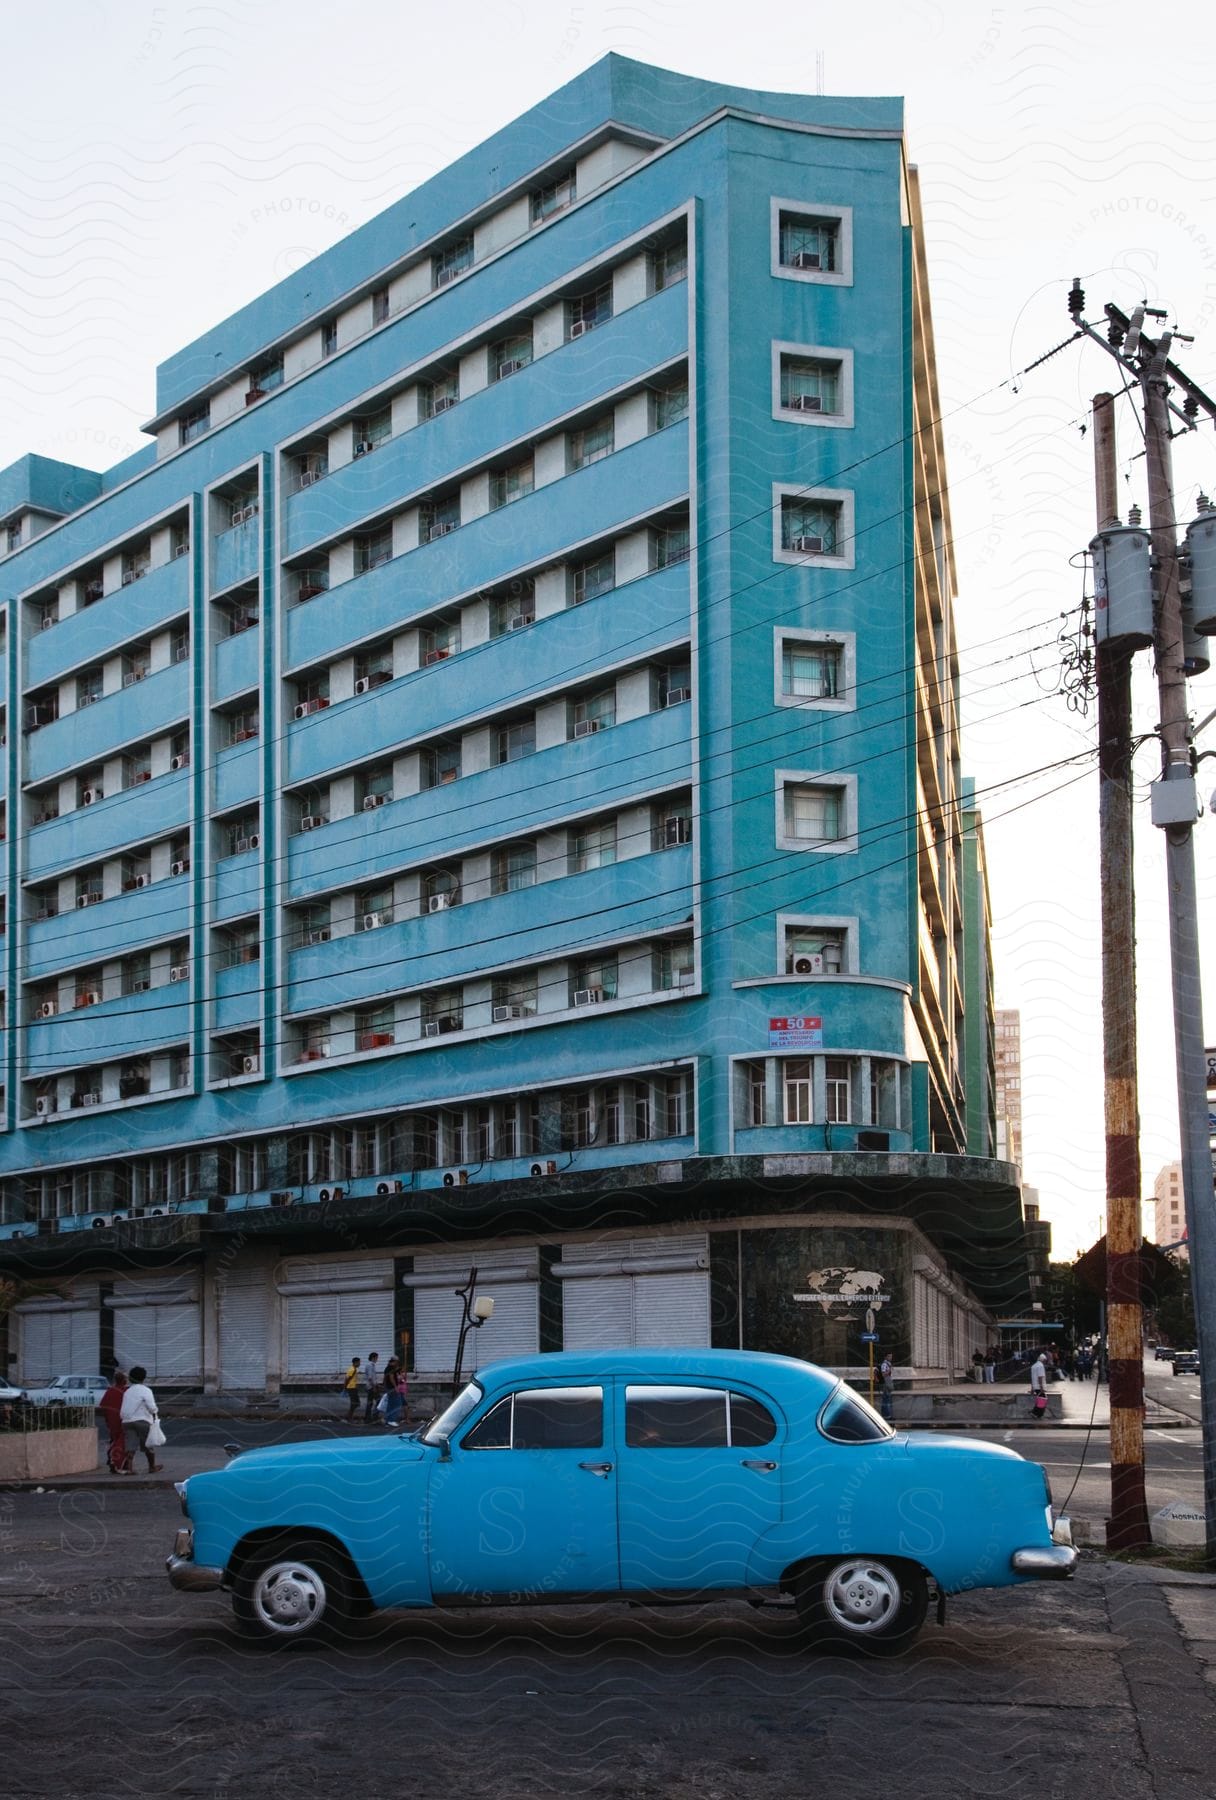 A vintage car parked in front of an apartment building